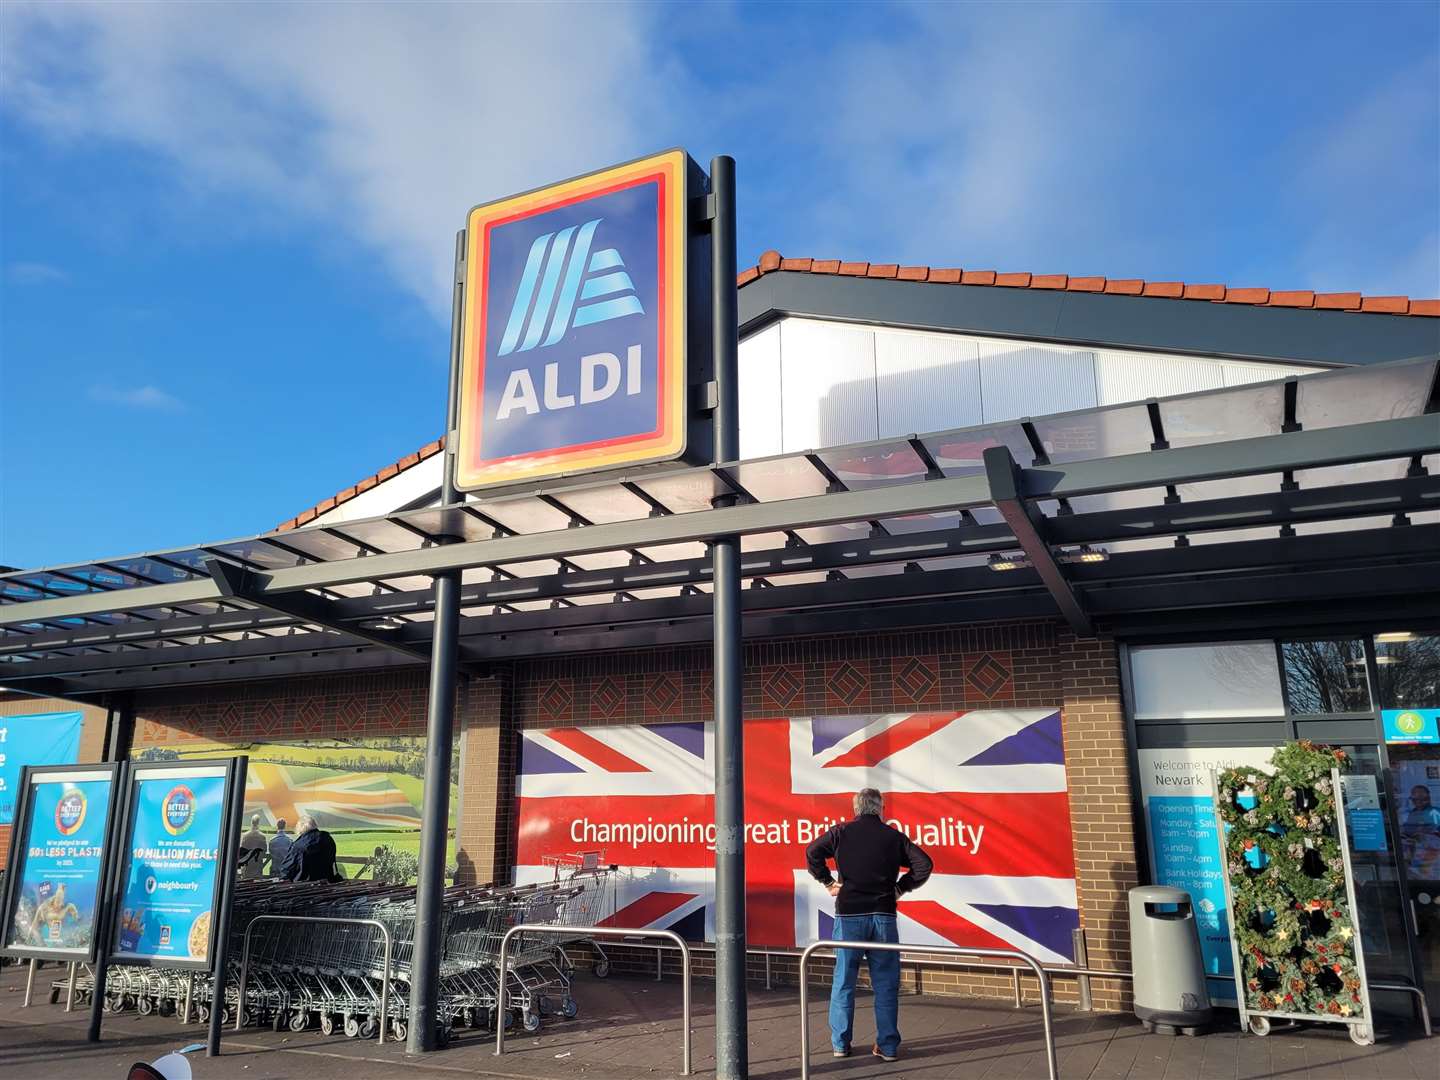 Aldi was the first to issue a recall alert